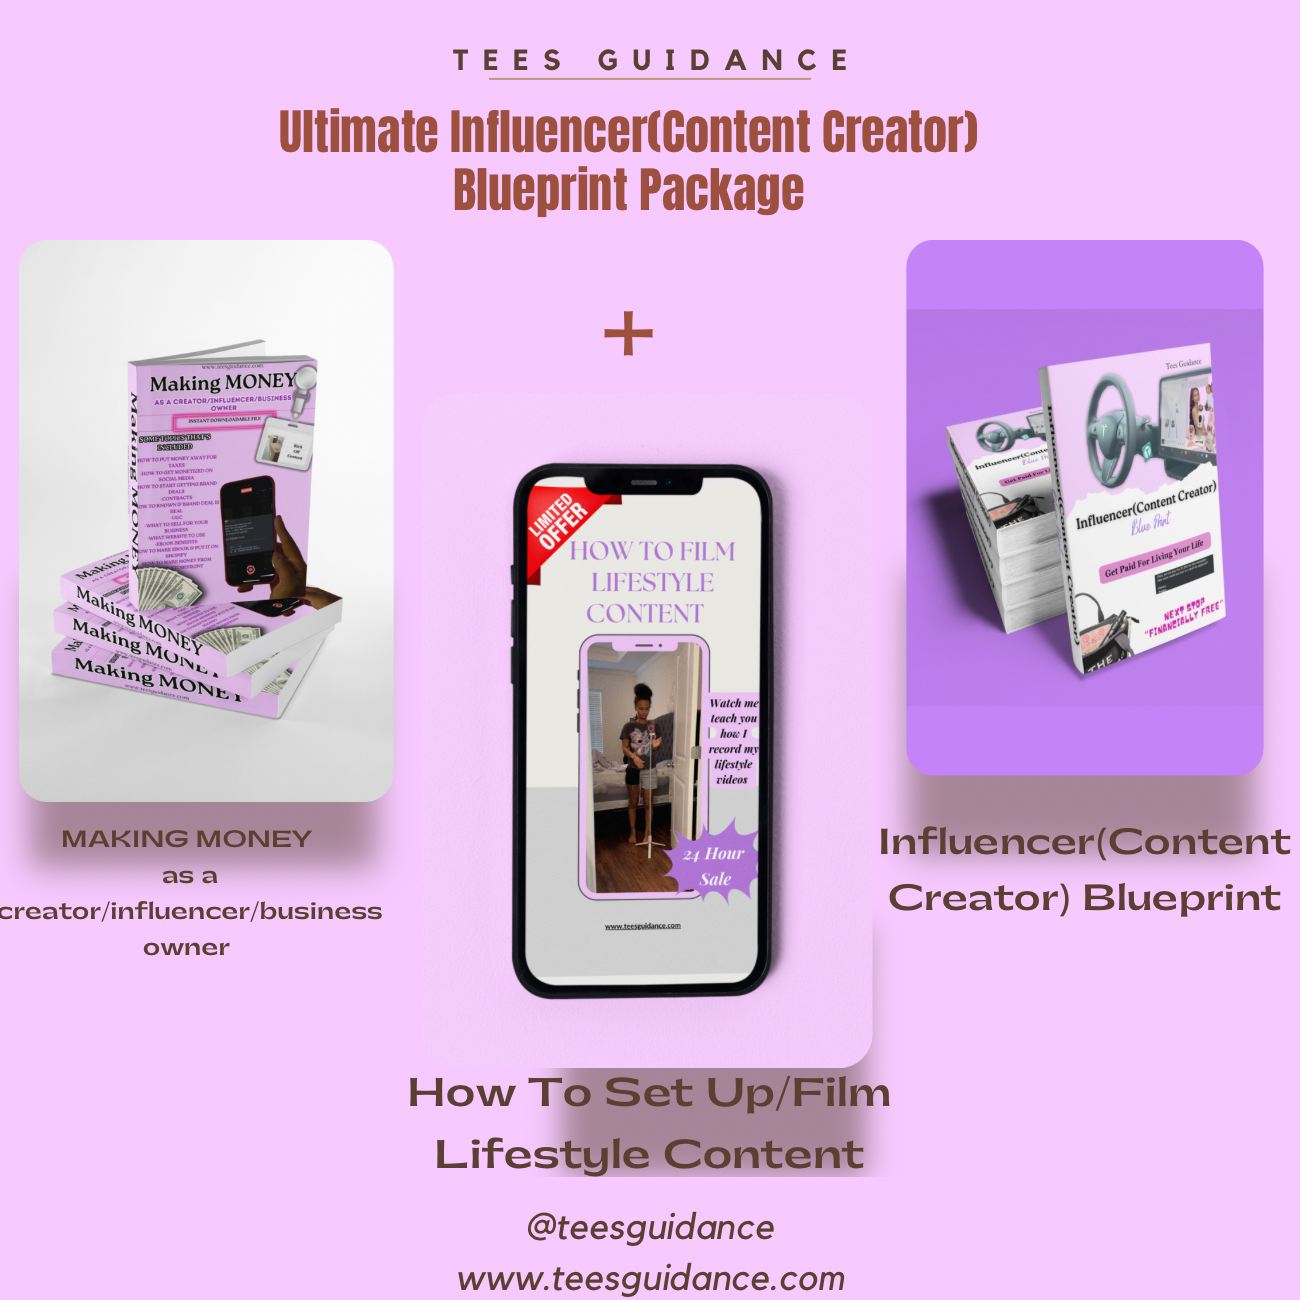 Ultimate Influencer(Content Creator) Blueprint Package Course